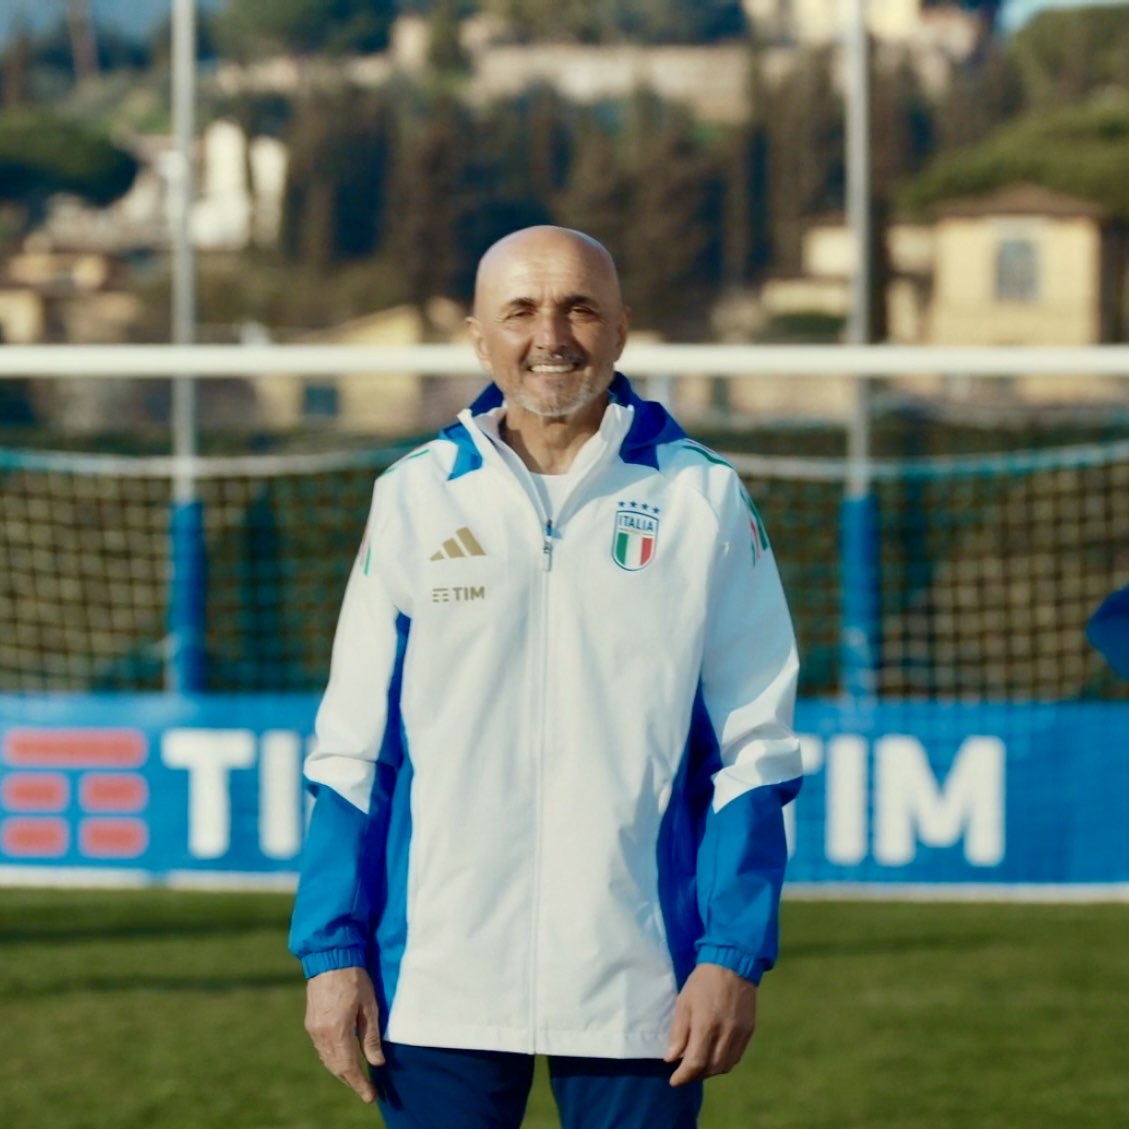 TIM commercial - With Luciano Spalletti and the 'Azzurri' of the national team